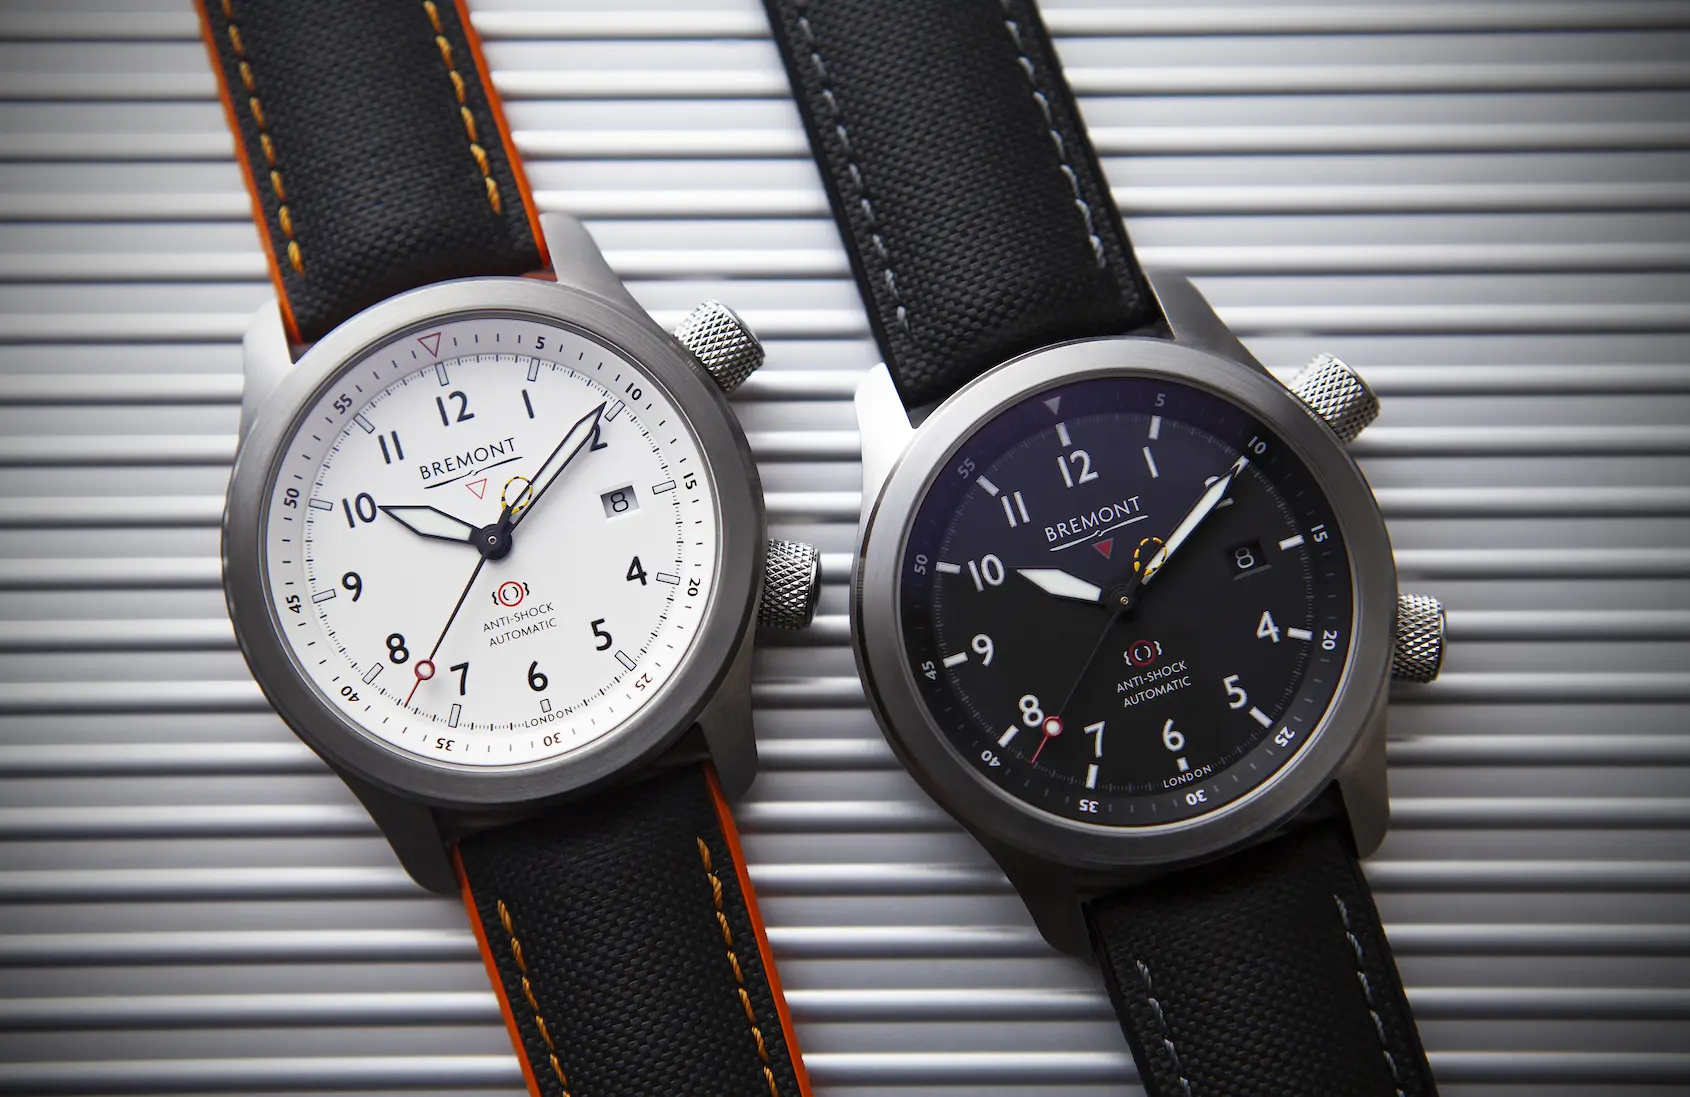 Bespoke, baby! You can now build your own custom Bremont Martin-Baker -  Time and Tide Watches